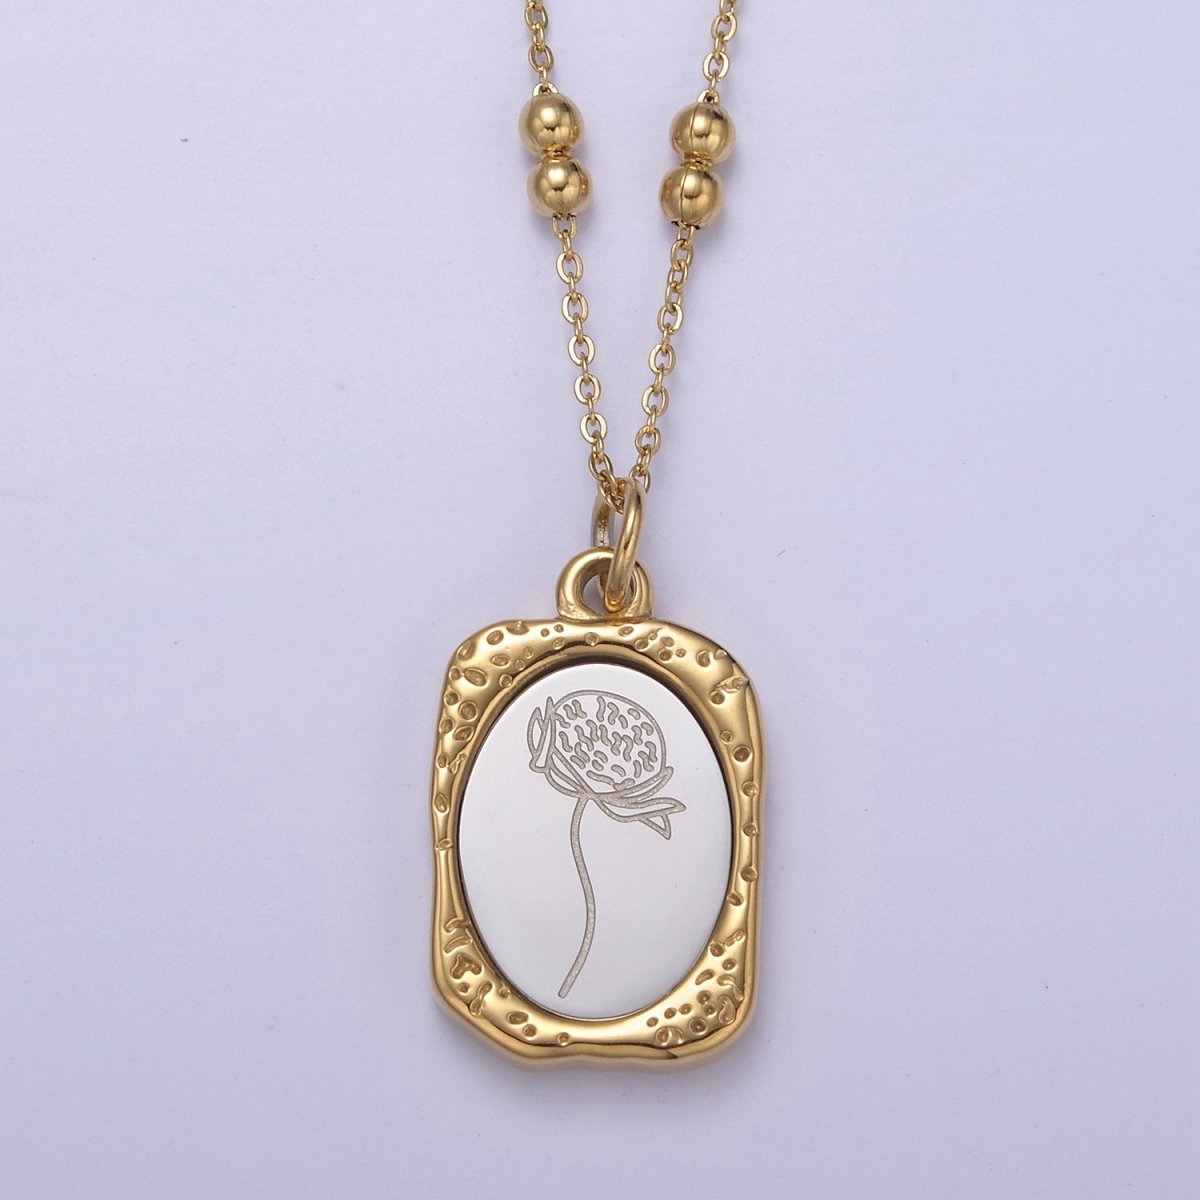 Gold Flower Tag Charm Engraved Floral Pendant Necklace with Satellite Chain Necklace Wholesale Fashion Jewelry | WA-708 to WA-720 Clearance Pricing - DLUXCA